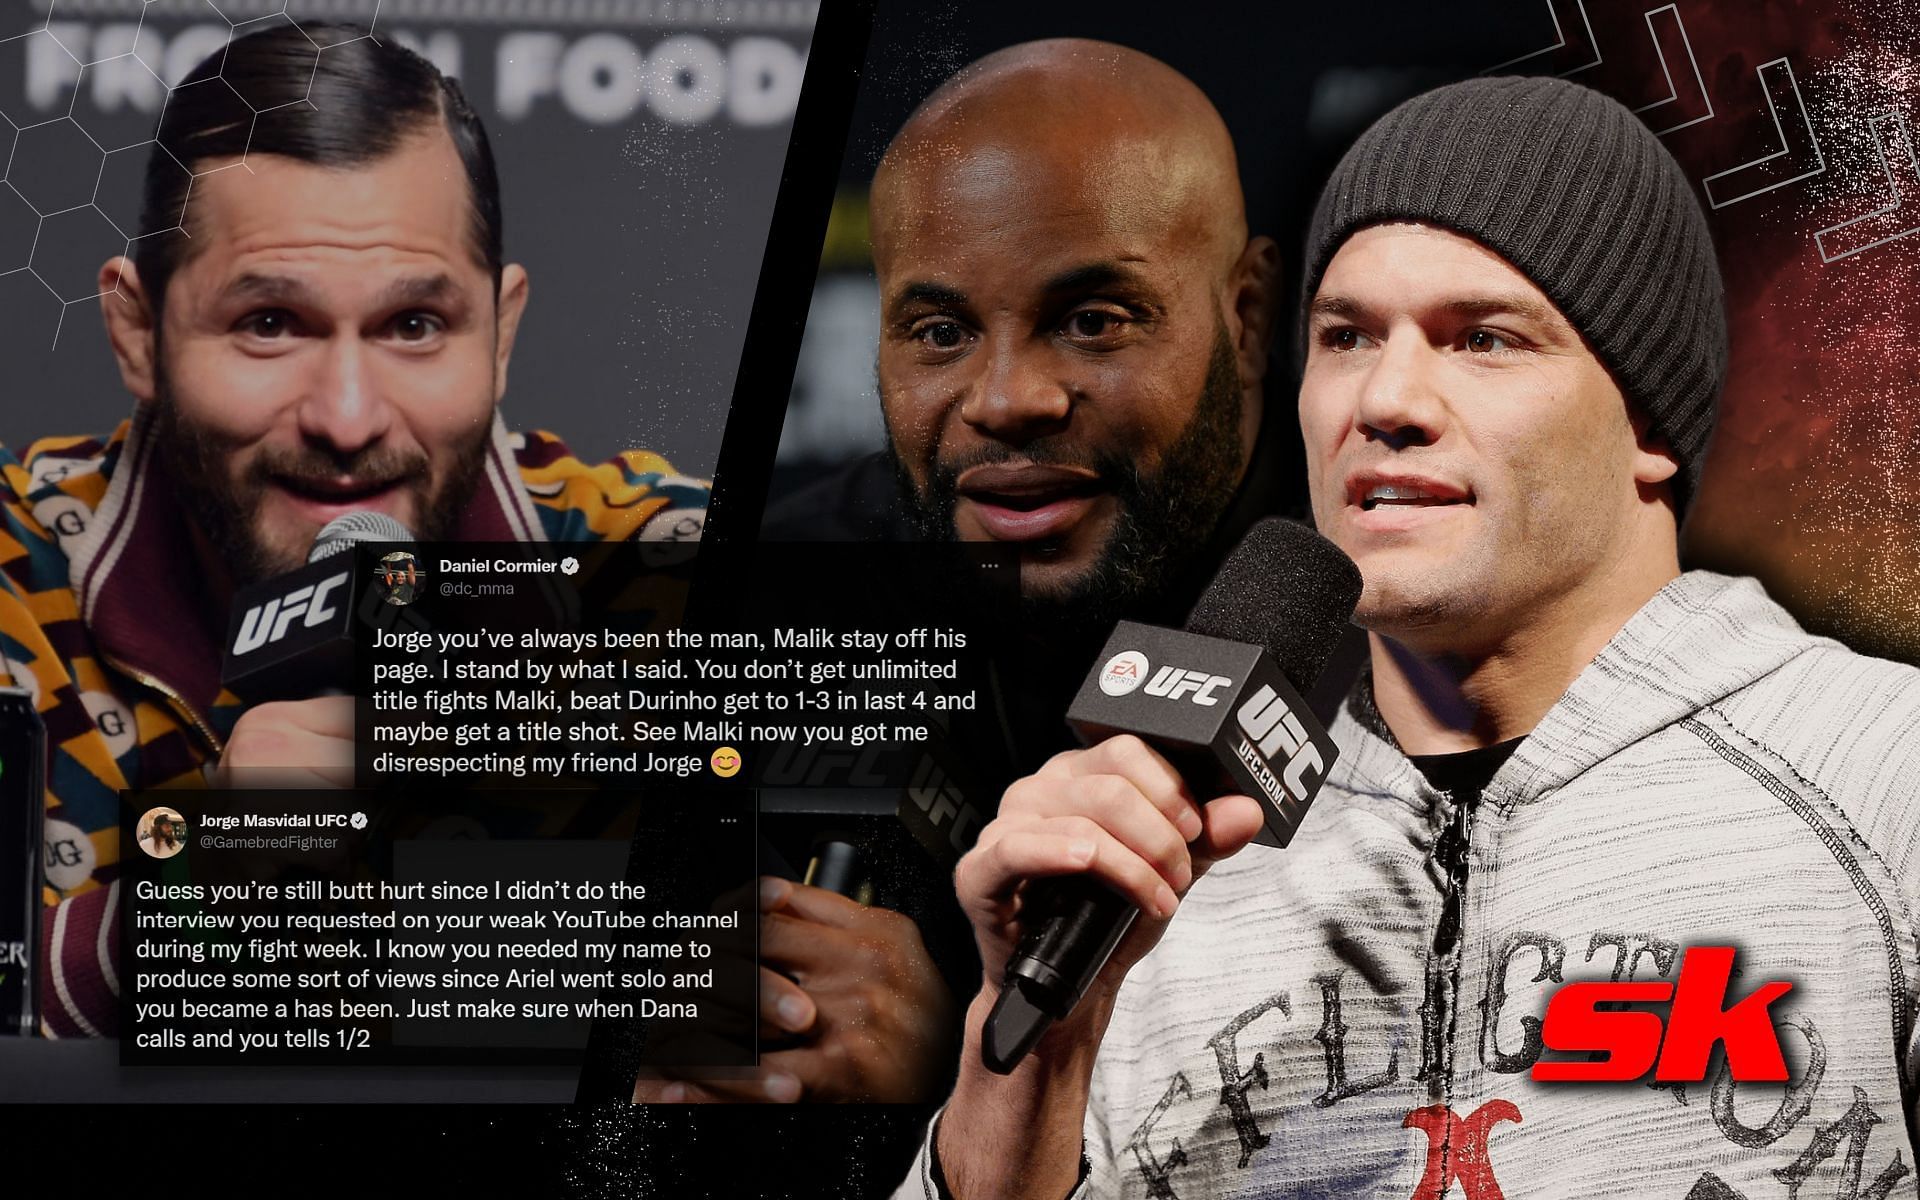 Josh Thomson sides with Daniel Cormier in his Twitter beef with Jorge Masvidal. [Image credits: Getty Images.]